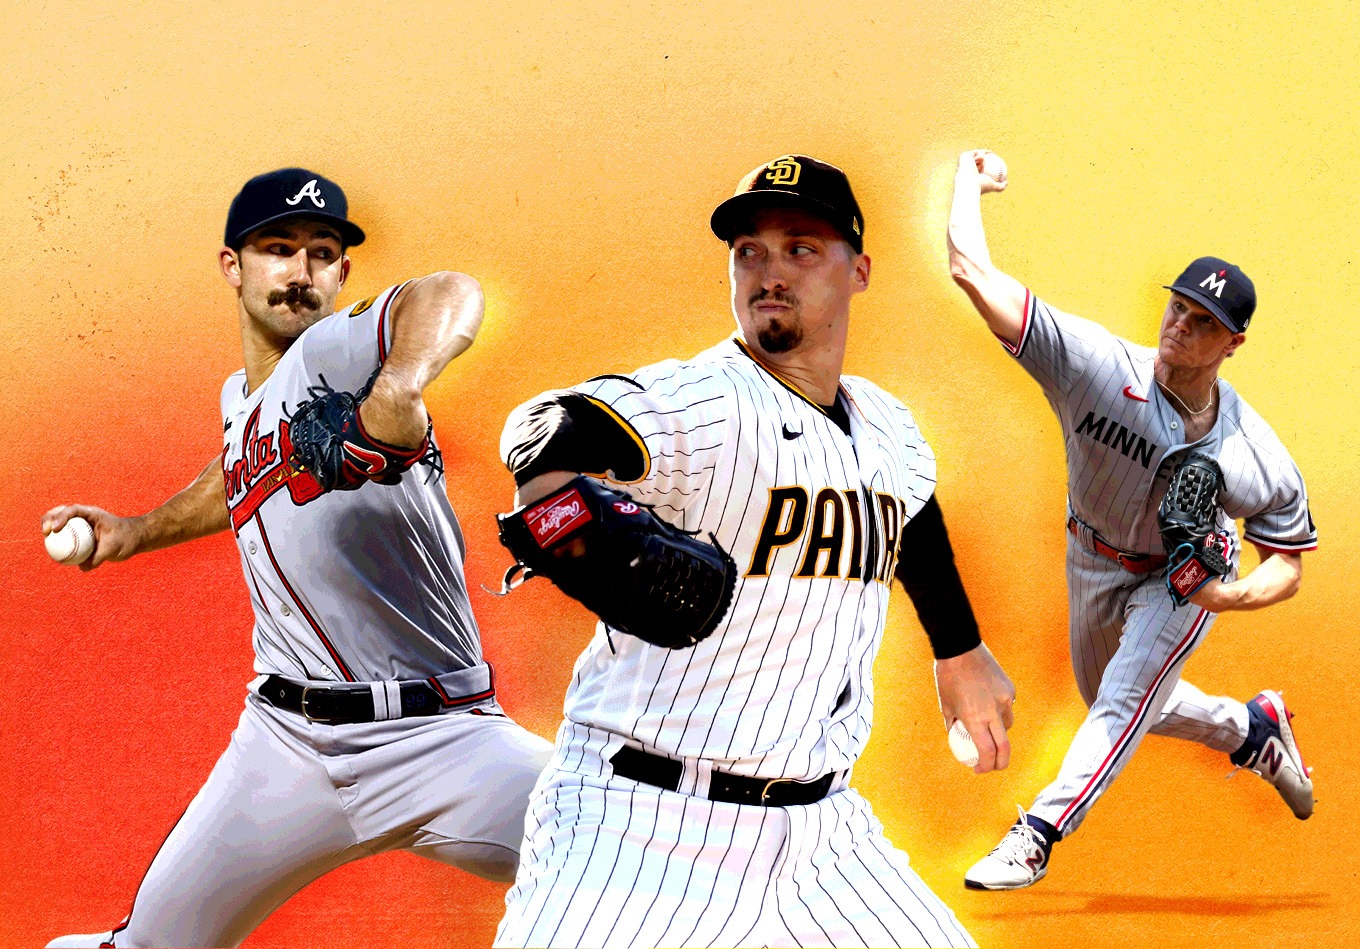 The K Kings: Which Pitchers Generate the Most Swings and Misses on Each Pitch Type?